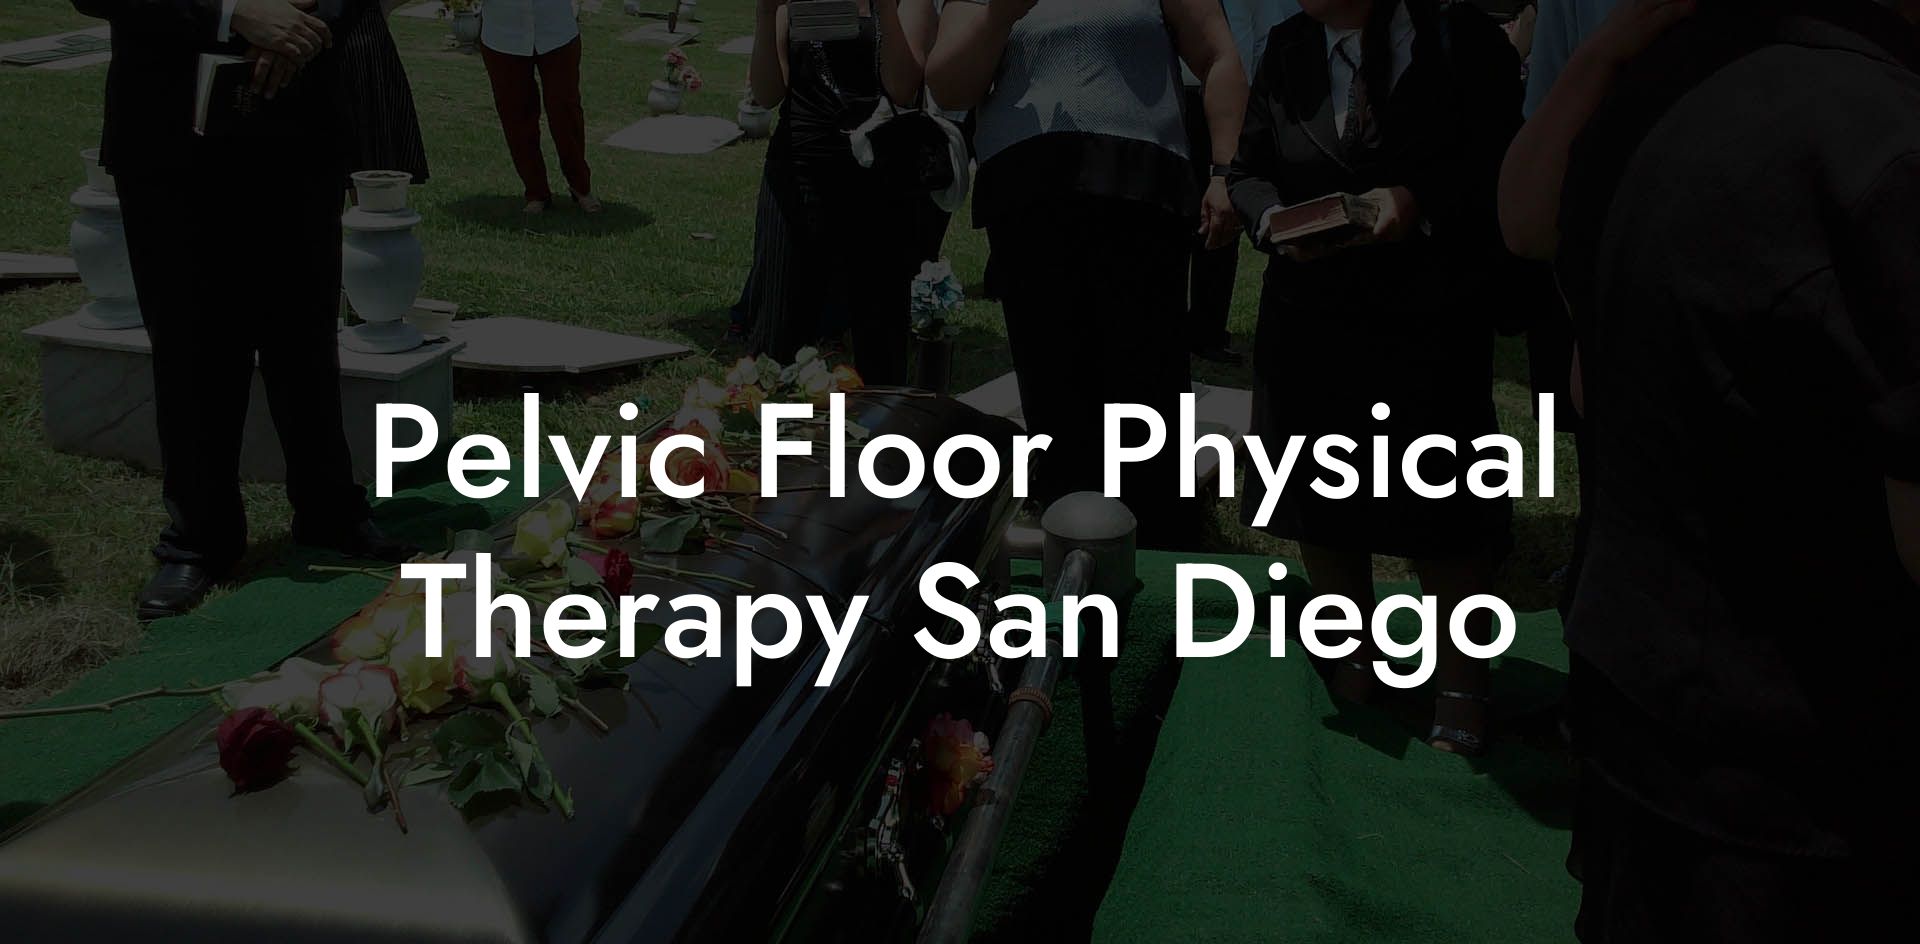 Pelvic Floor Physical Therapy San Diego